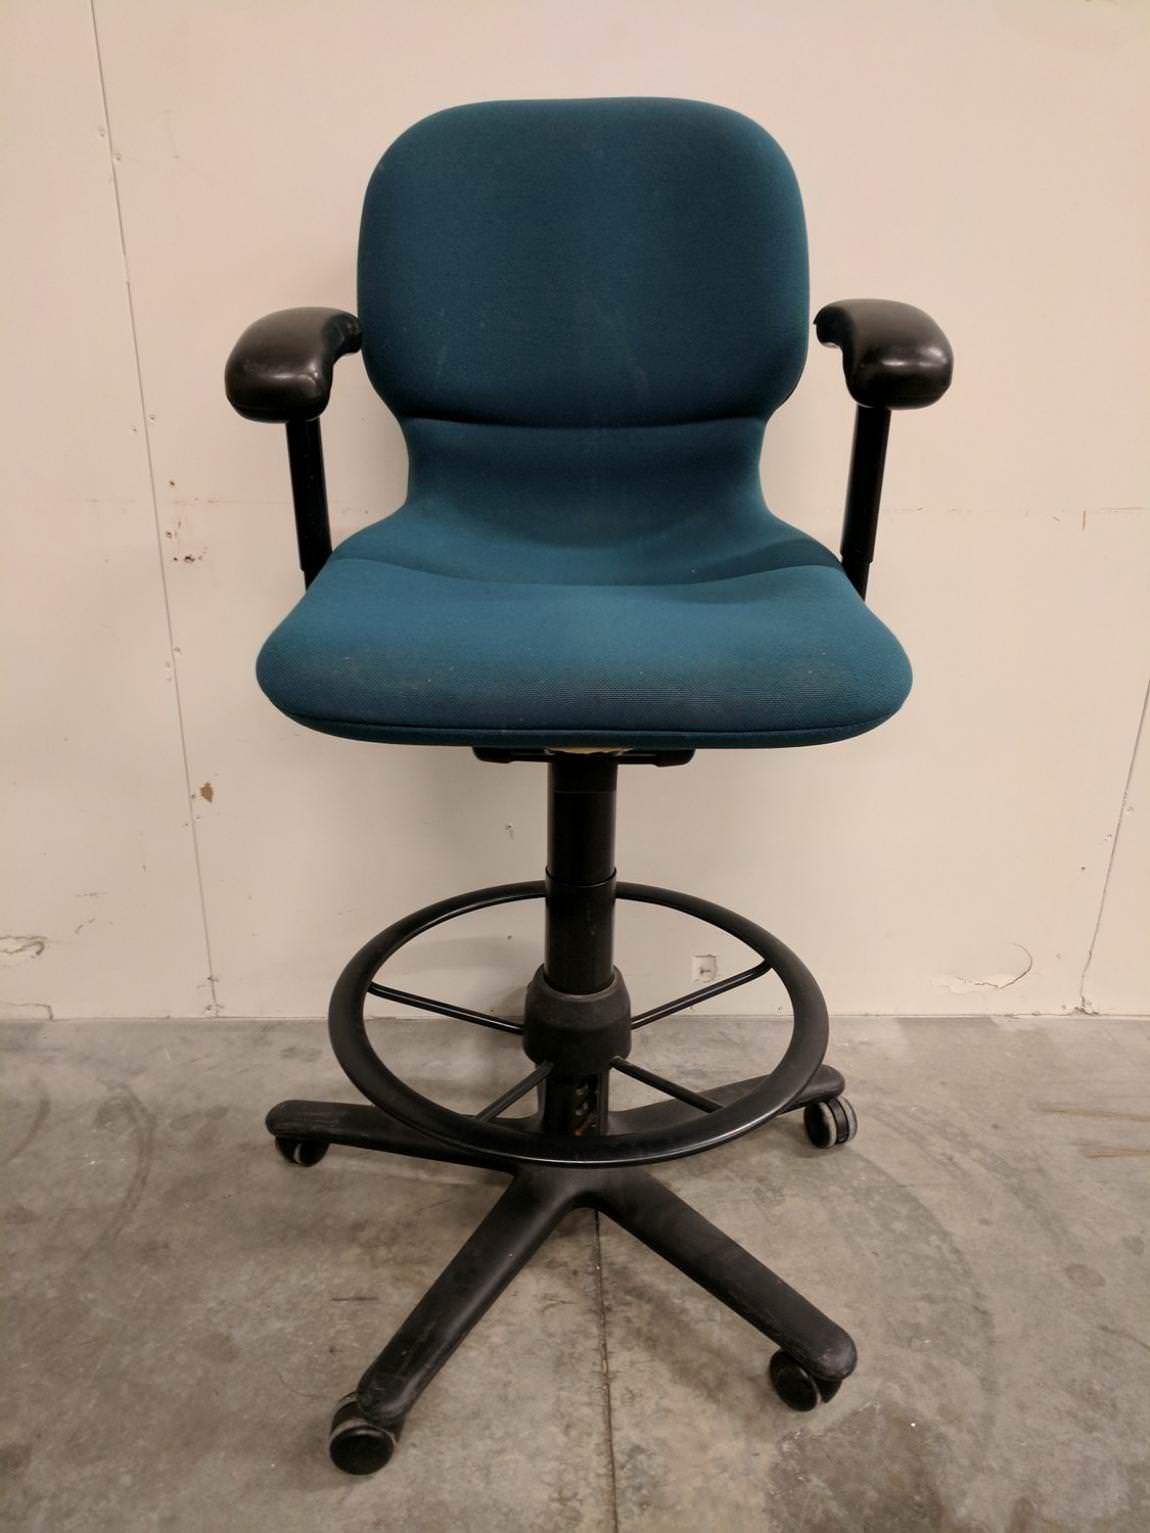 Teal Steelcase Low-Back Rolling Stool Chair